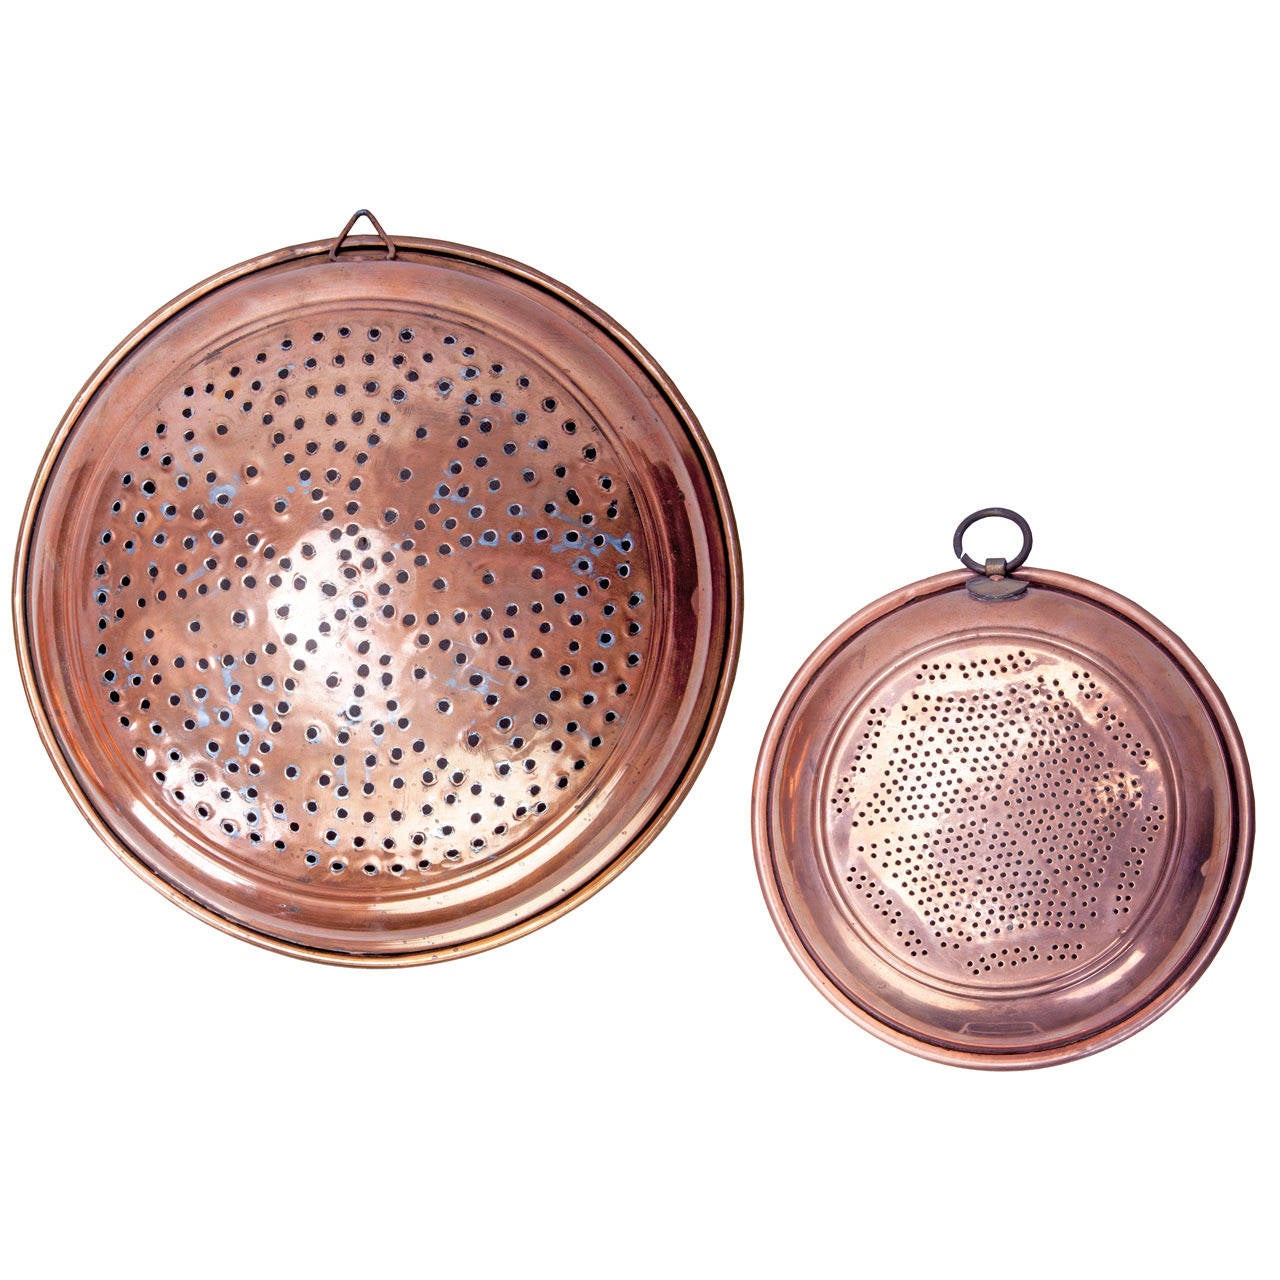 Turn of the Century Copper Strainers